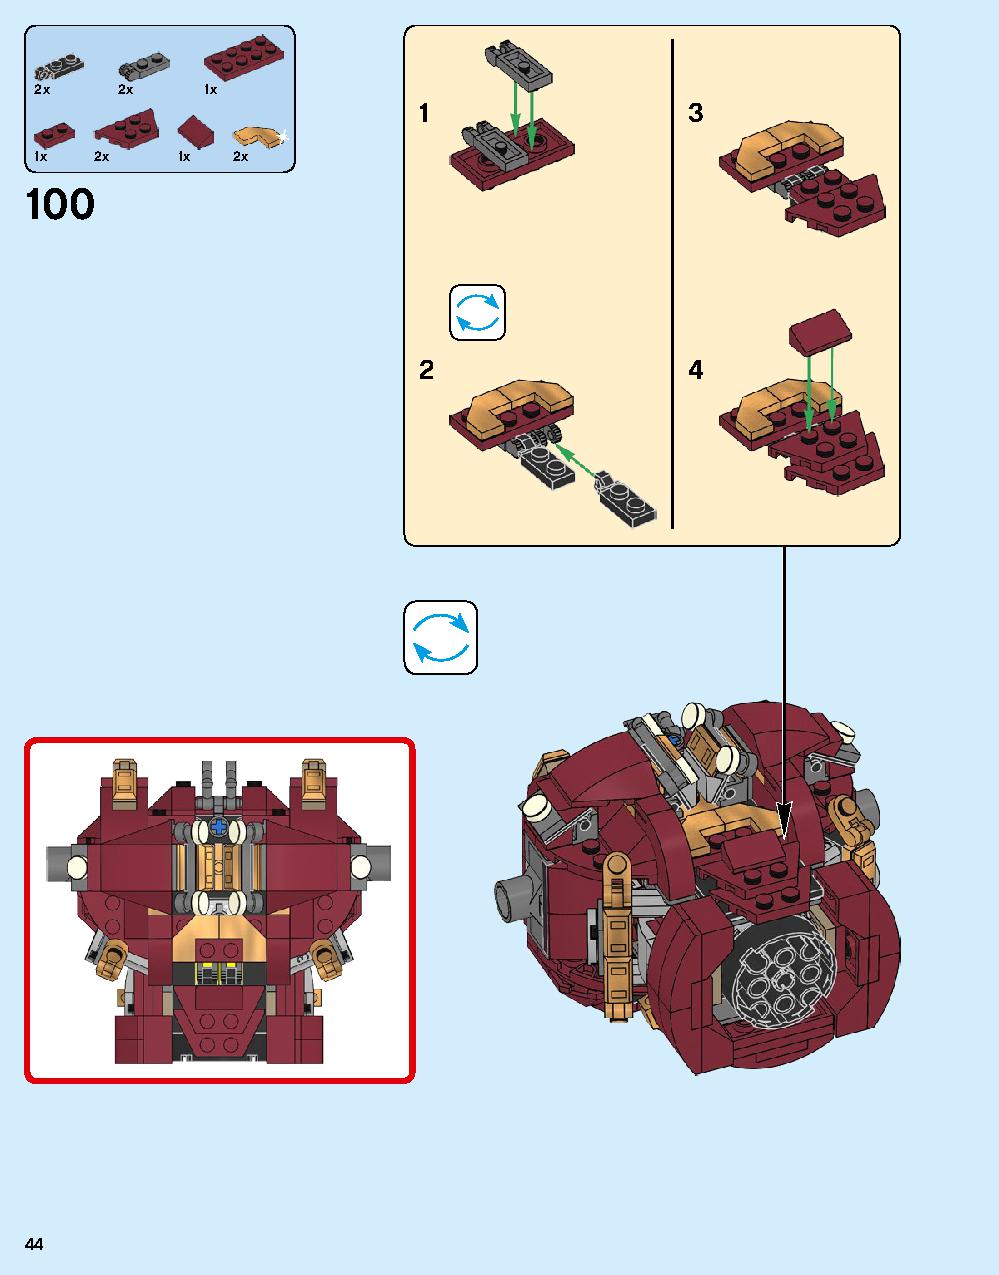 The Hulkbuster: Ultron Edition 76105 LEGO information LEGO instructions 44 page